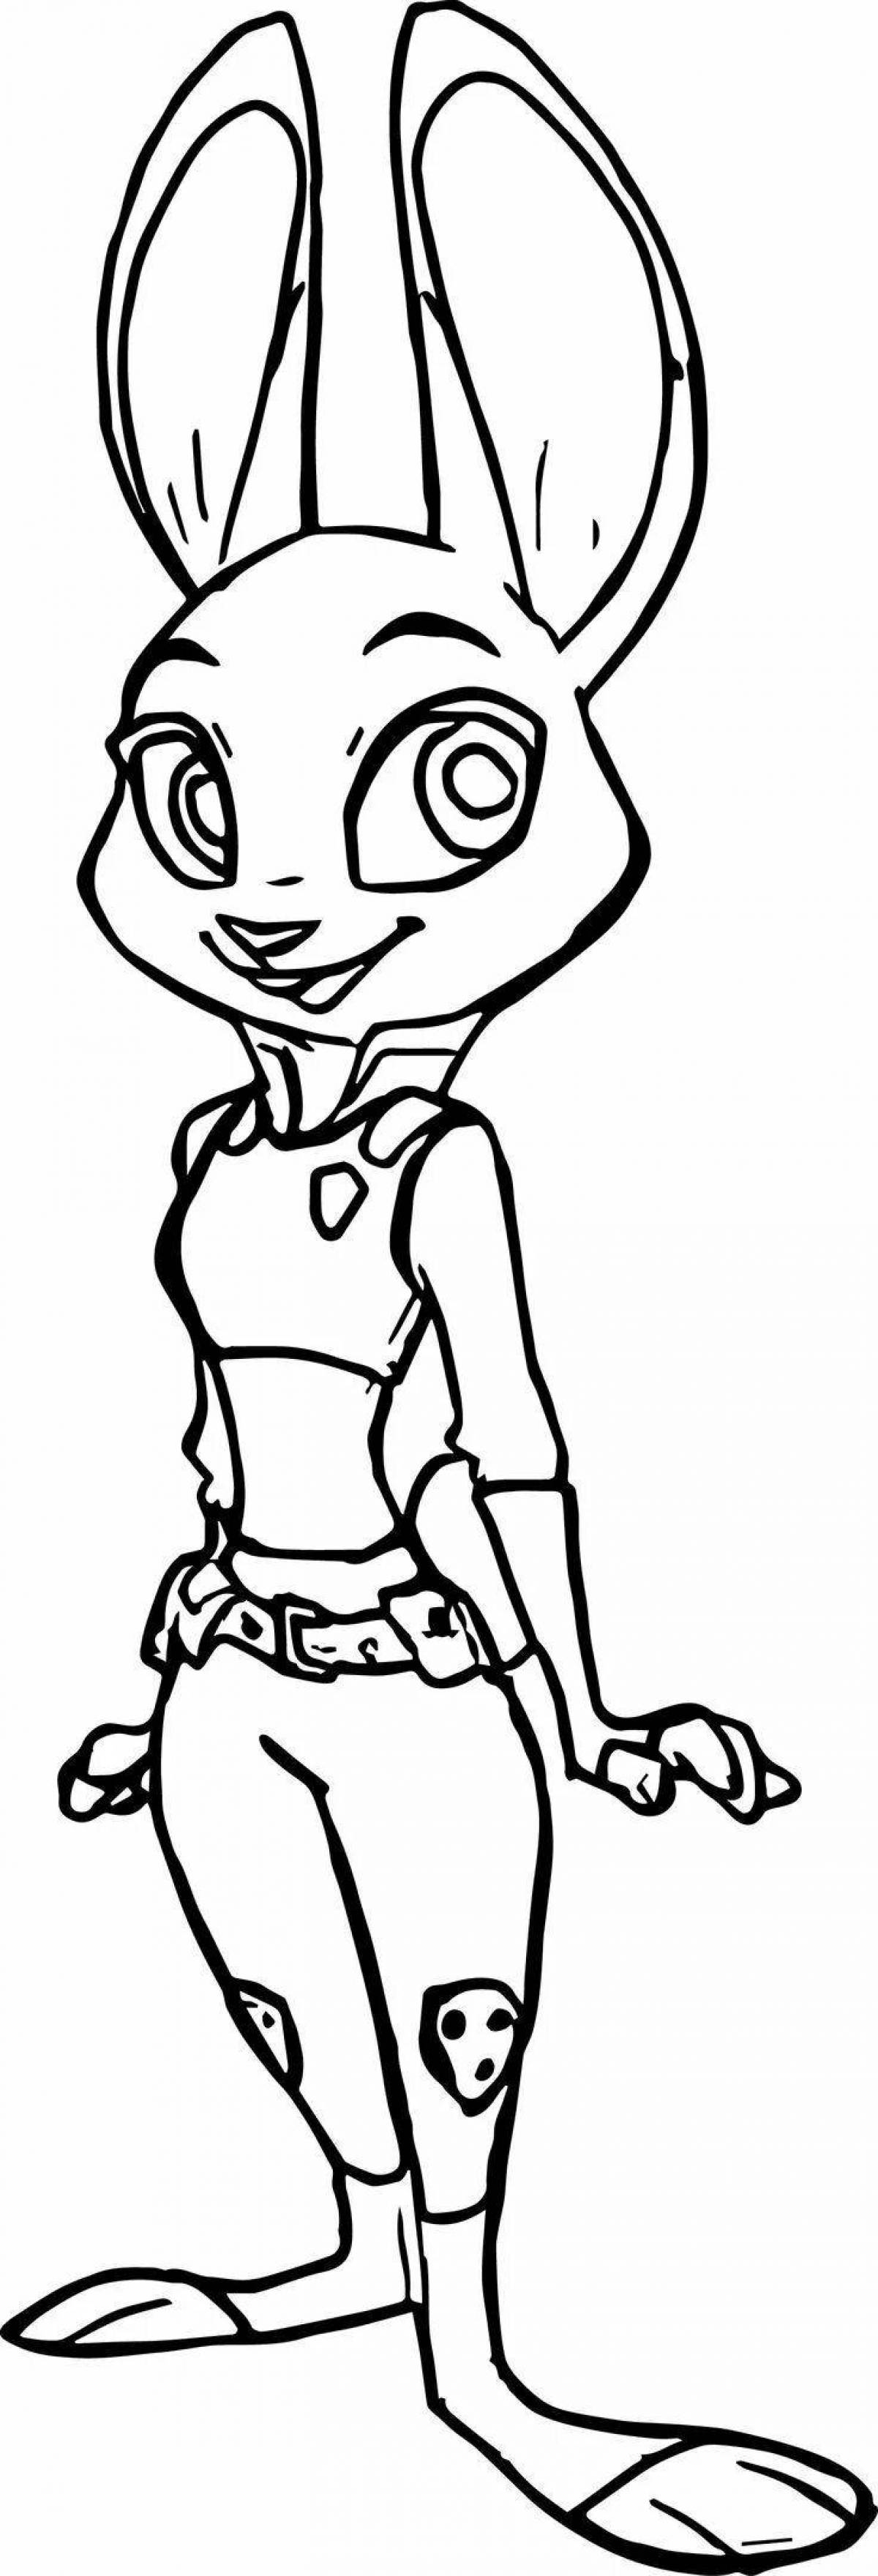 Judy hopps animated coloring page